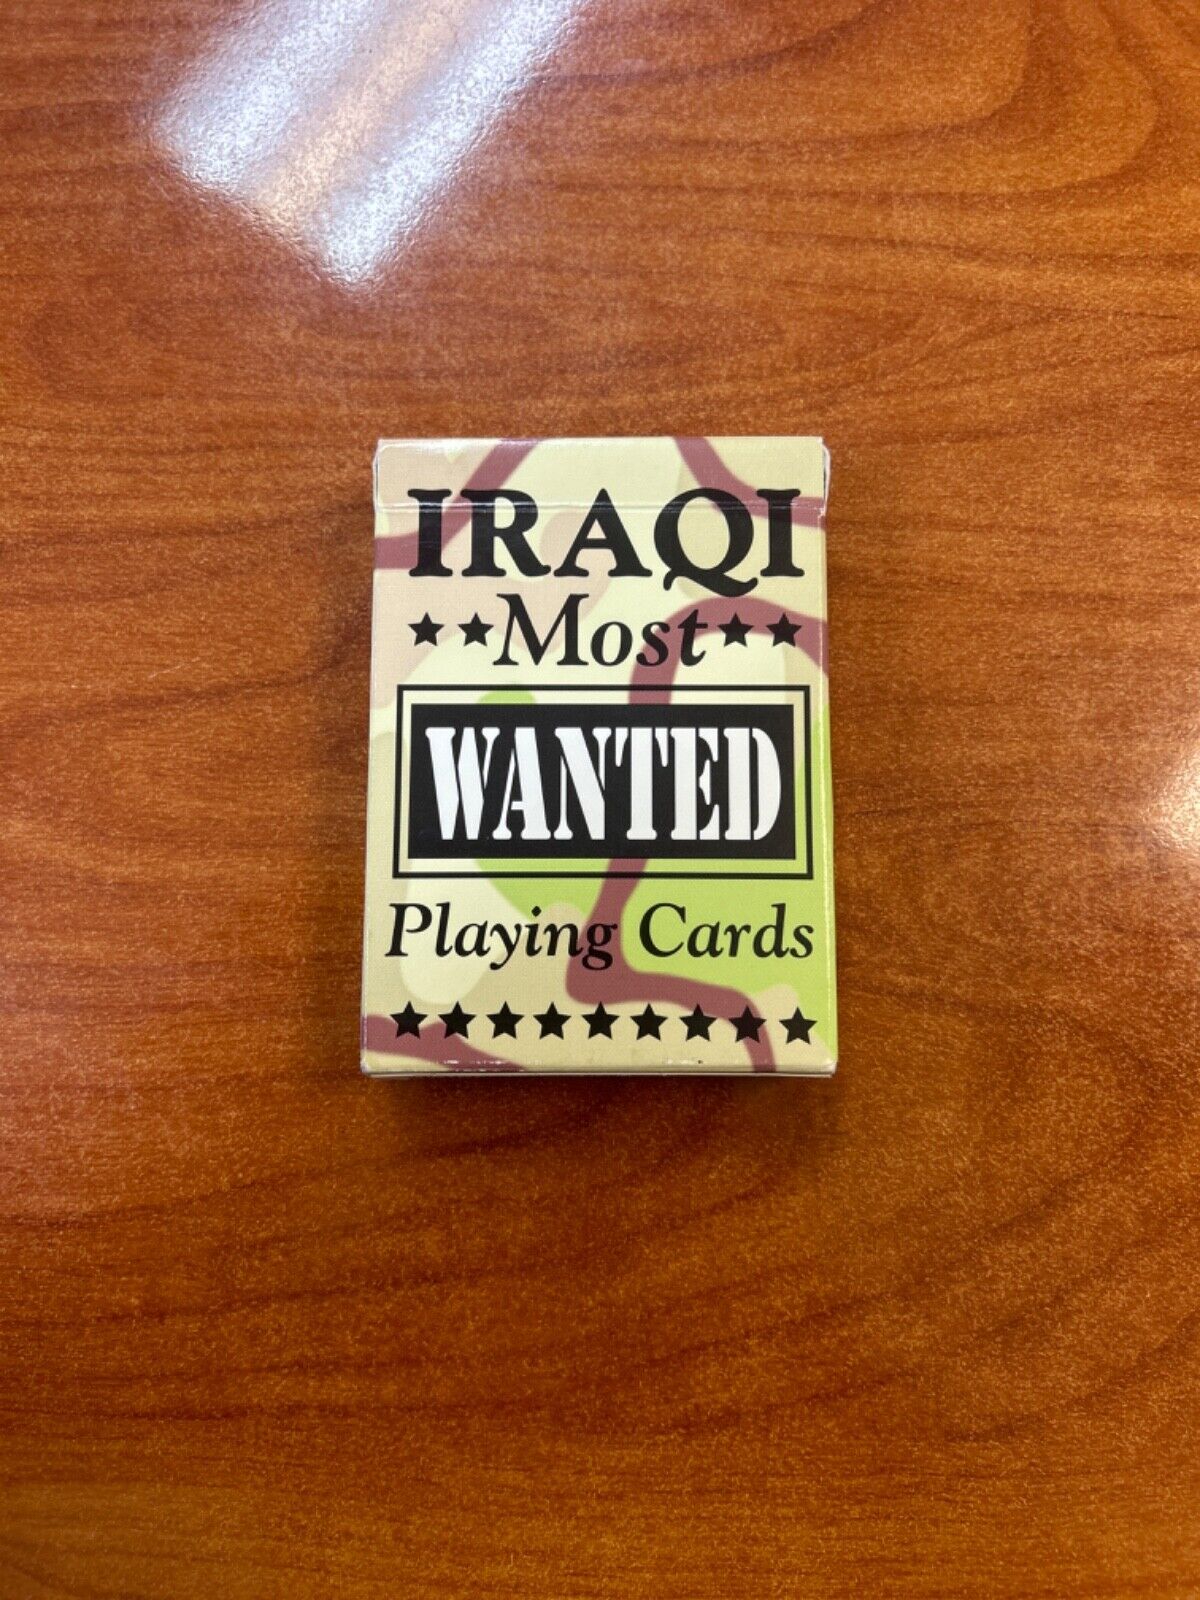 Bicycle Iraqi Most Wanted Playing Cards - 41187-06453